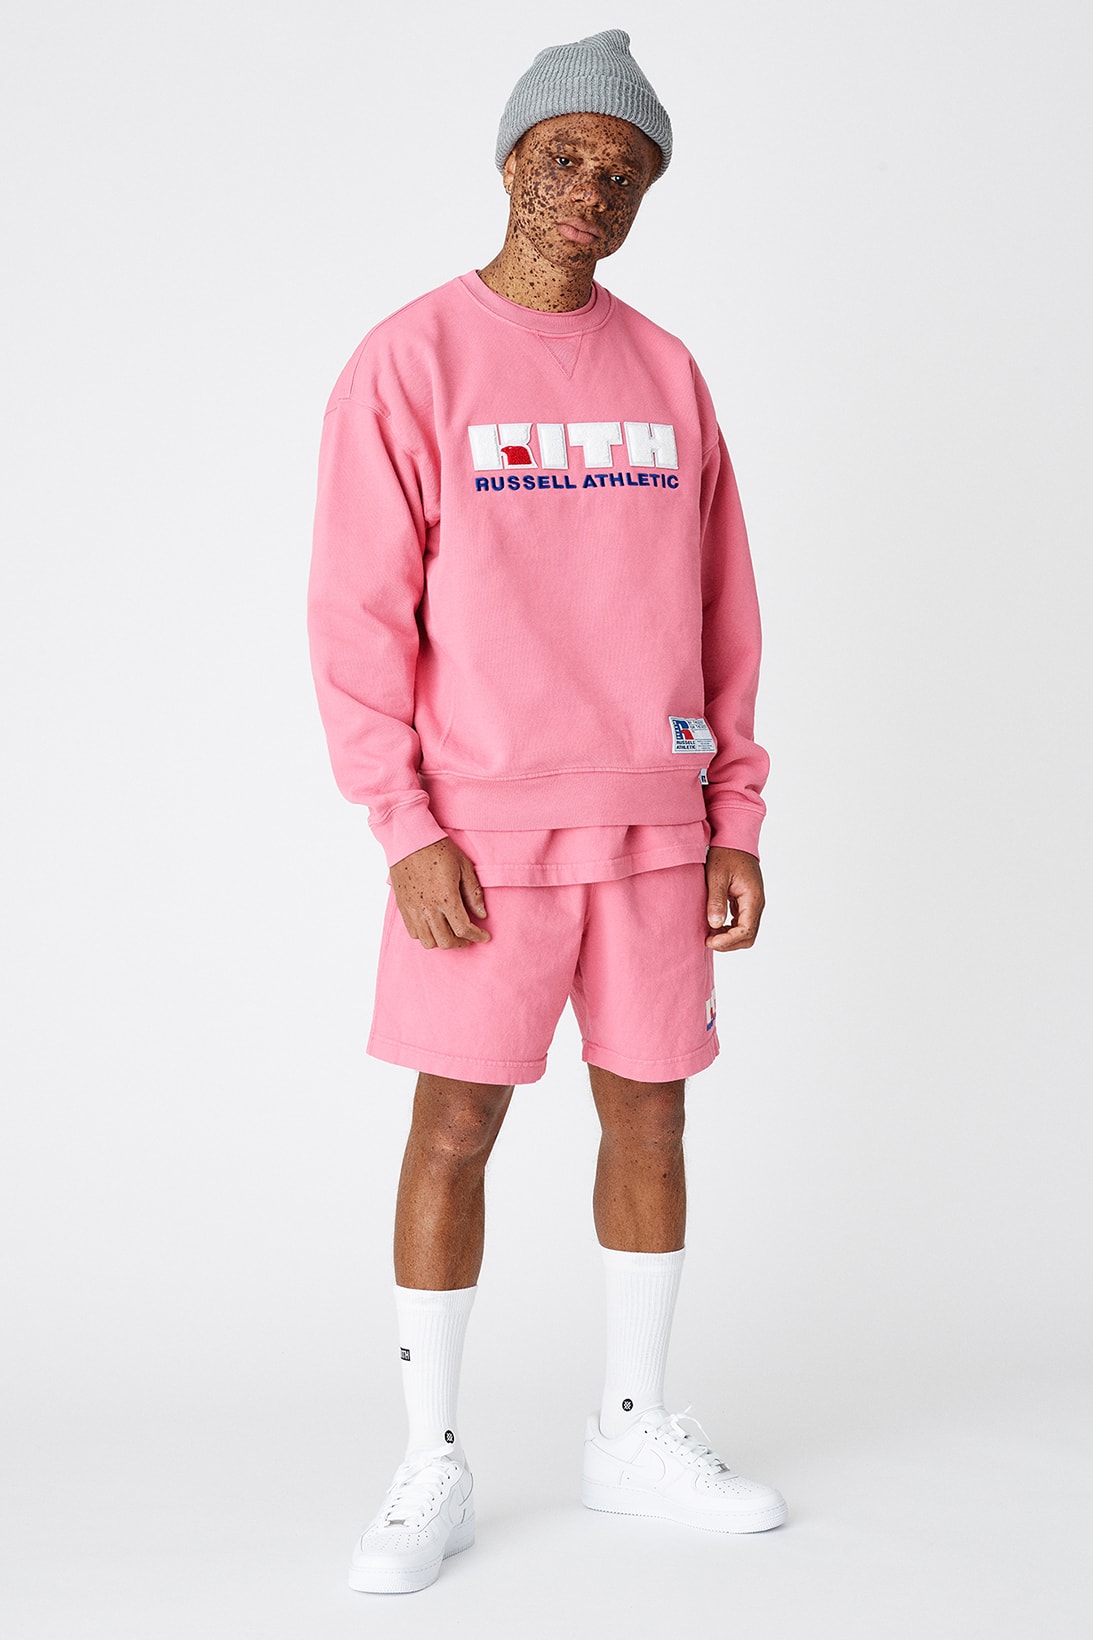 KITH x Russell Athletic Unisex Collaboration